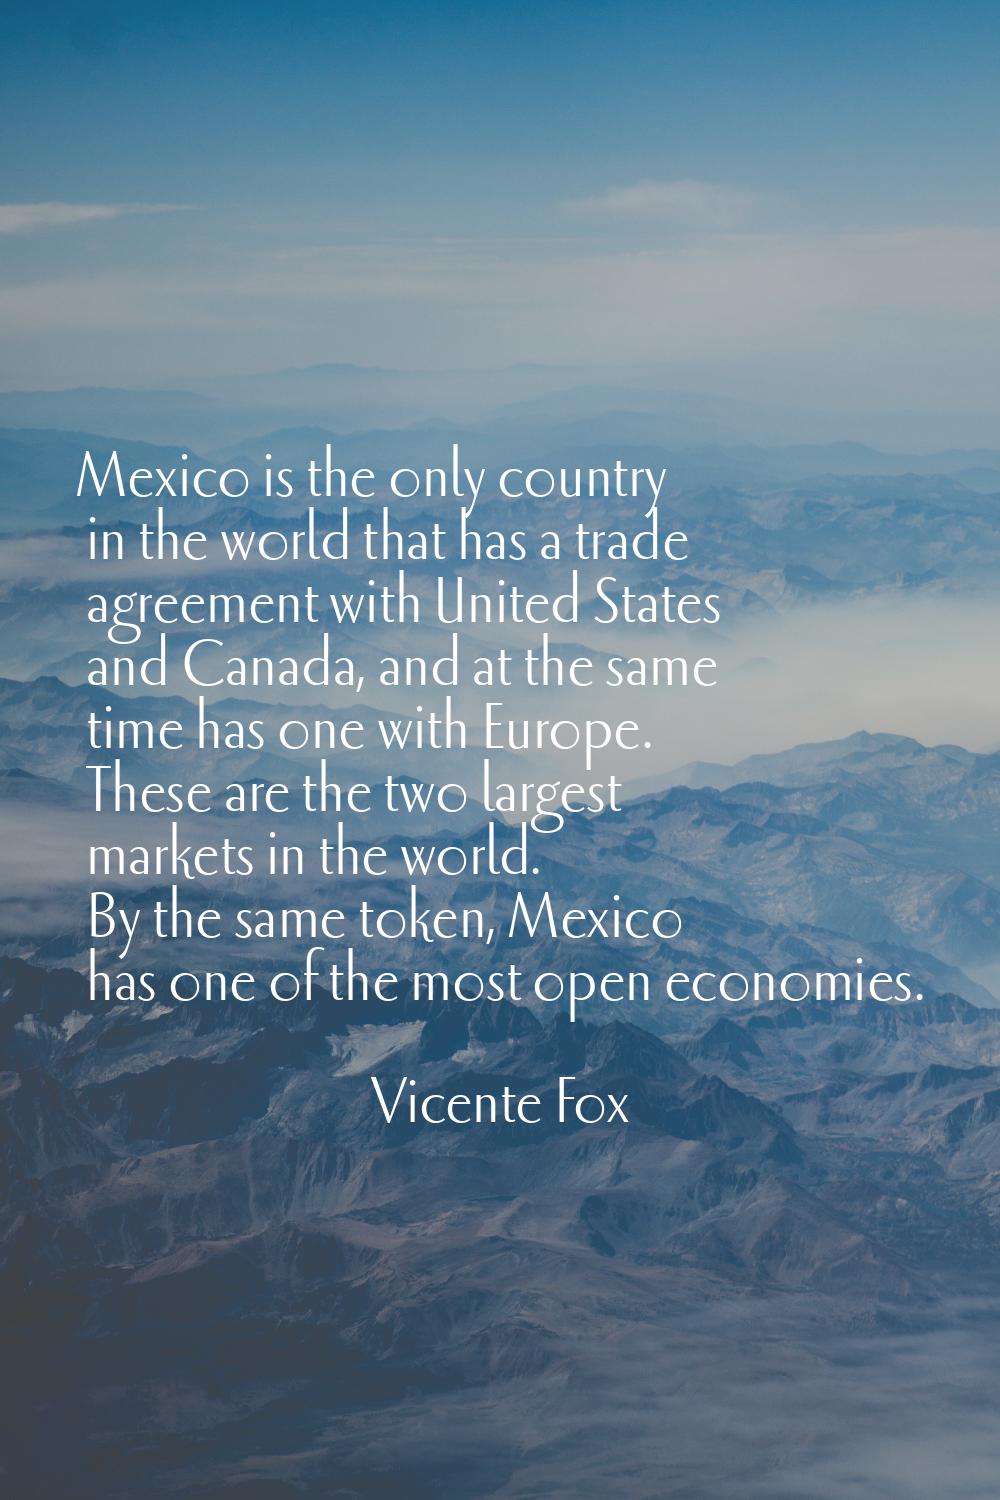 Mexico is the only country in the world that has a trade agreement with United States and Canada, a